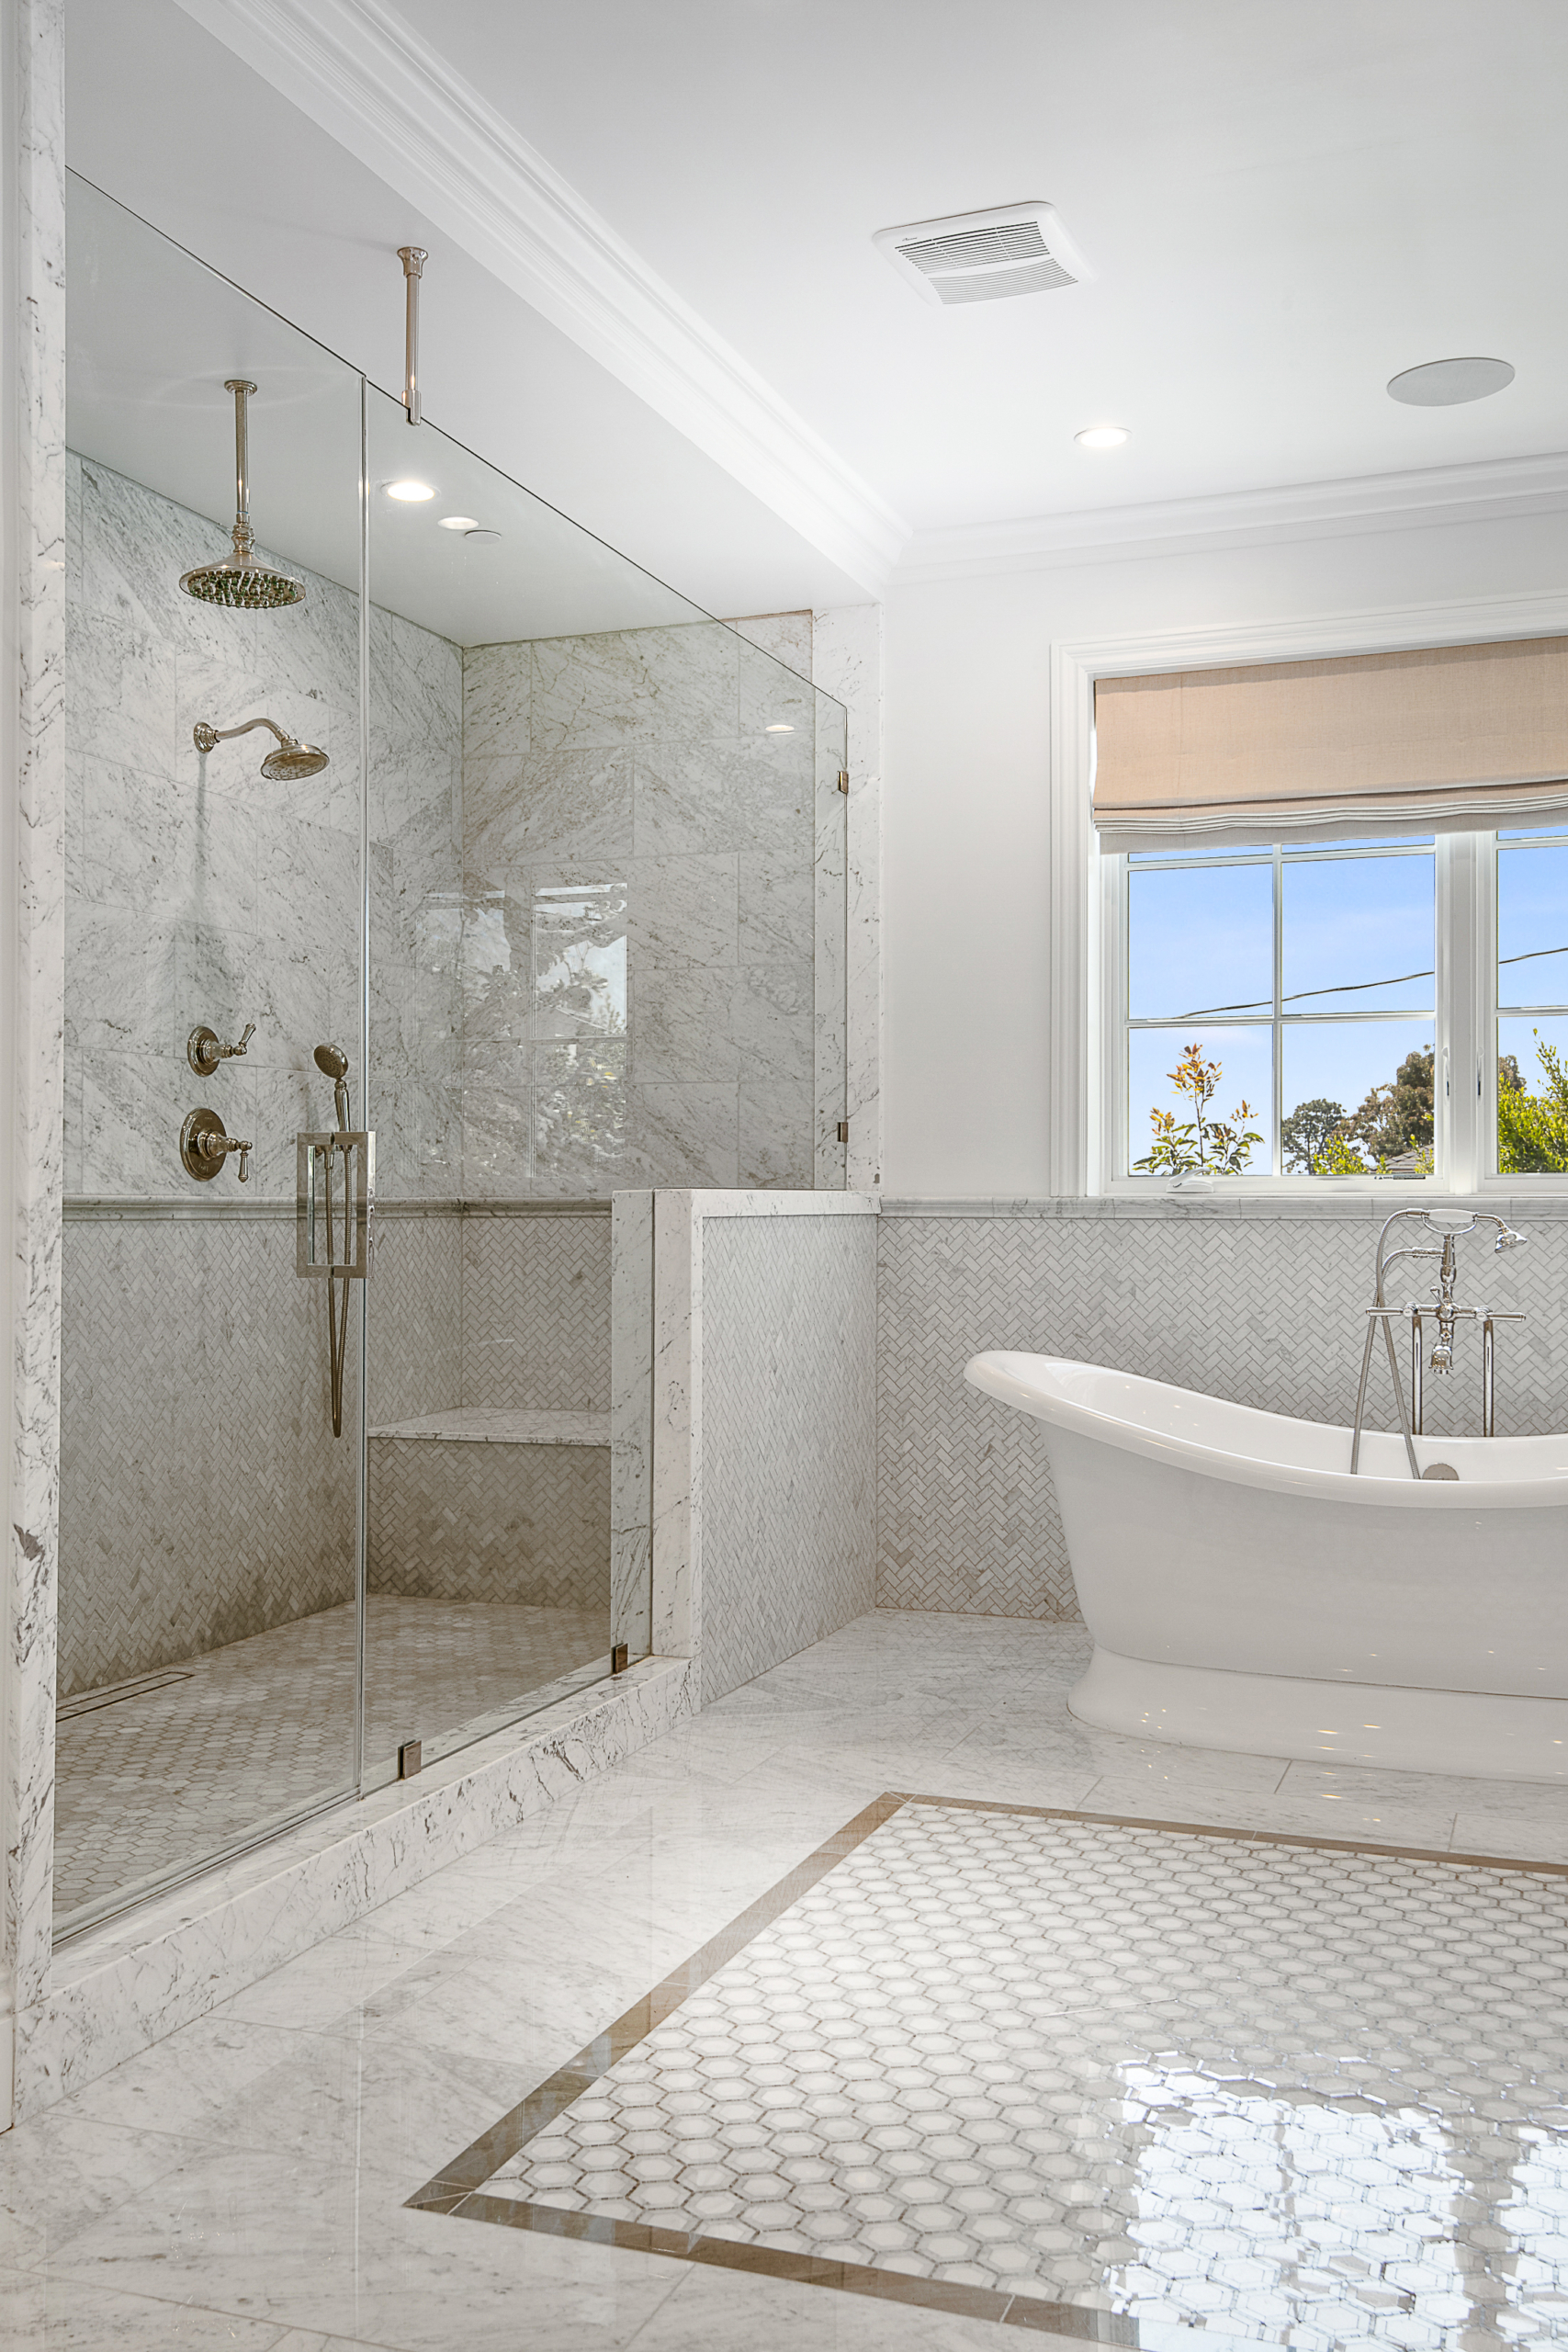 Bathroom with large walk-in shower with seating, soaker tub and window. Marble and grey and white tile